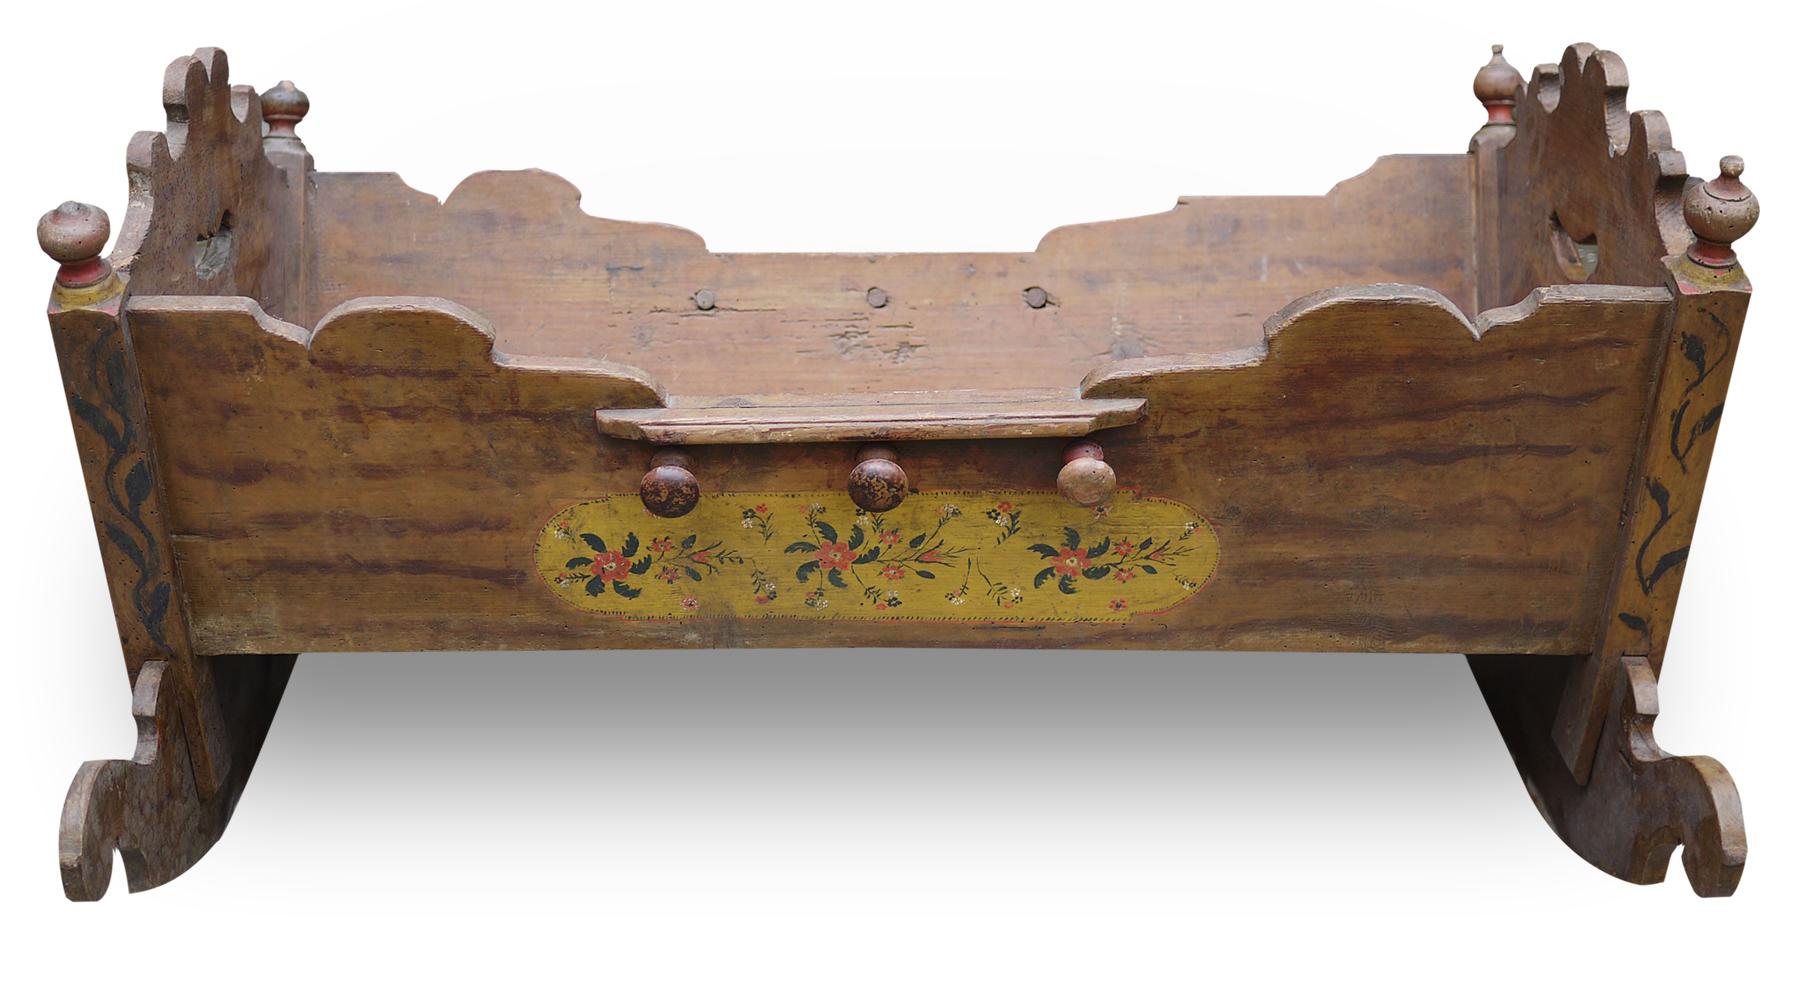 Rare original old painted Alpine cradle

Measures: H. 55cm, L. 90cm, P. 70cm

On the whole surface there are floral decorations and apotropaic symbols. At the ends, two medallions are painted, one depicting the Madonna and Child, the other the